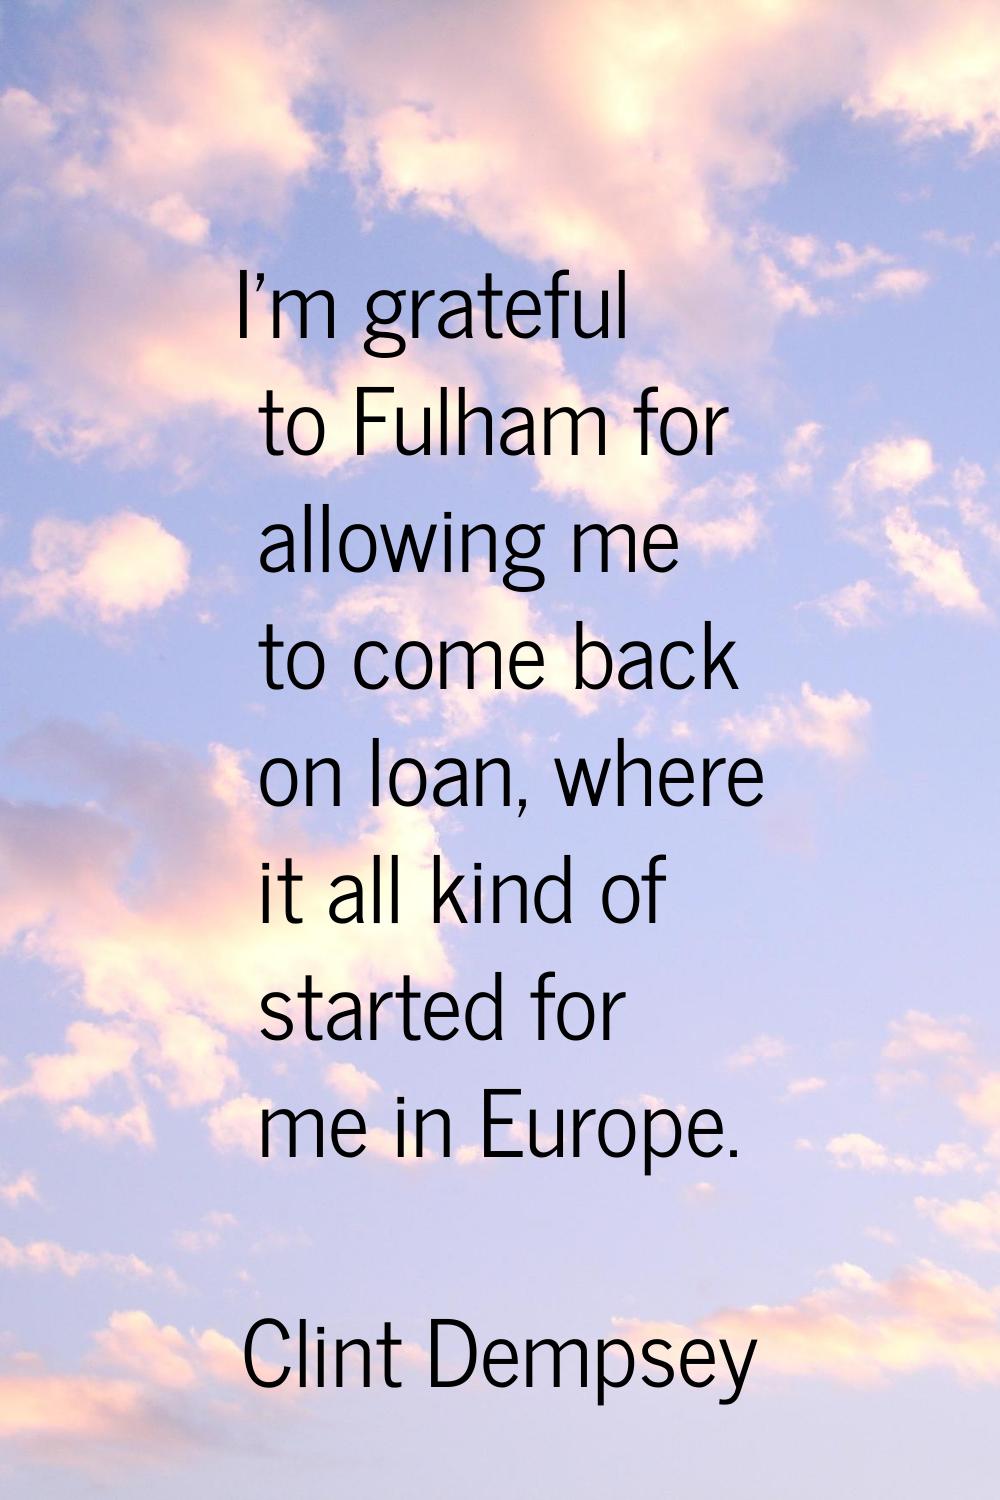 I'm grateful to Fulham for allowing me to come back on loan, where it all kind of started for me in